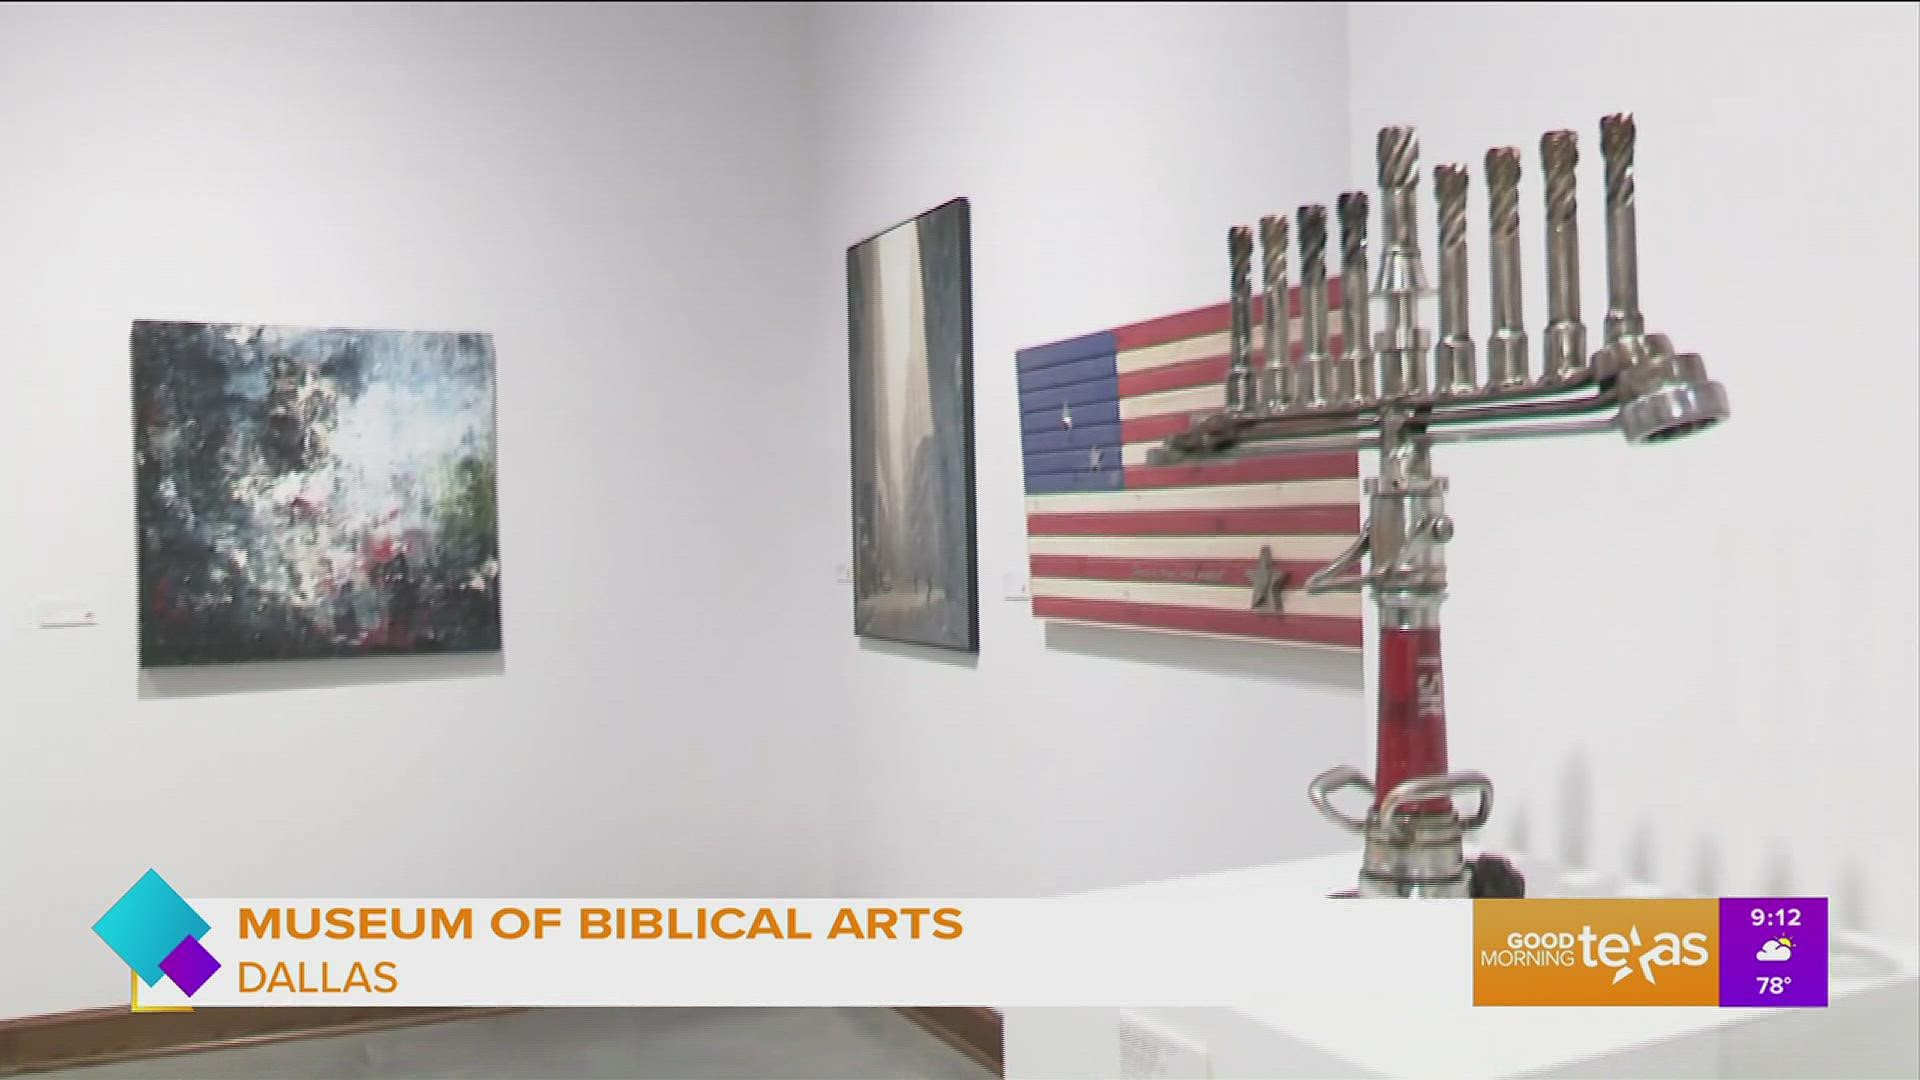 The Remember 9/11 Exhibitions now on display at the Museum of Biblical Art in Dallas